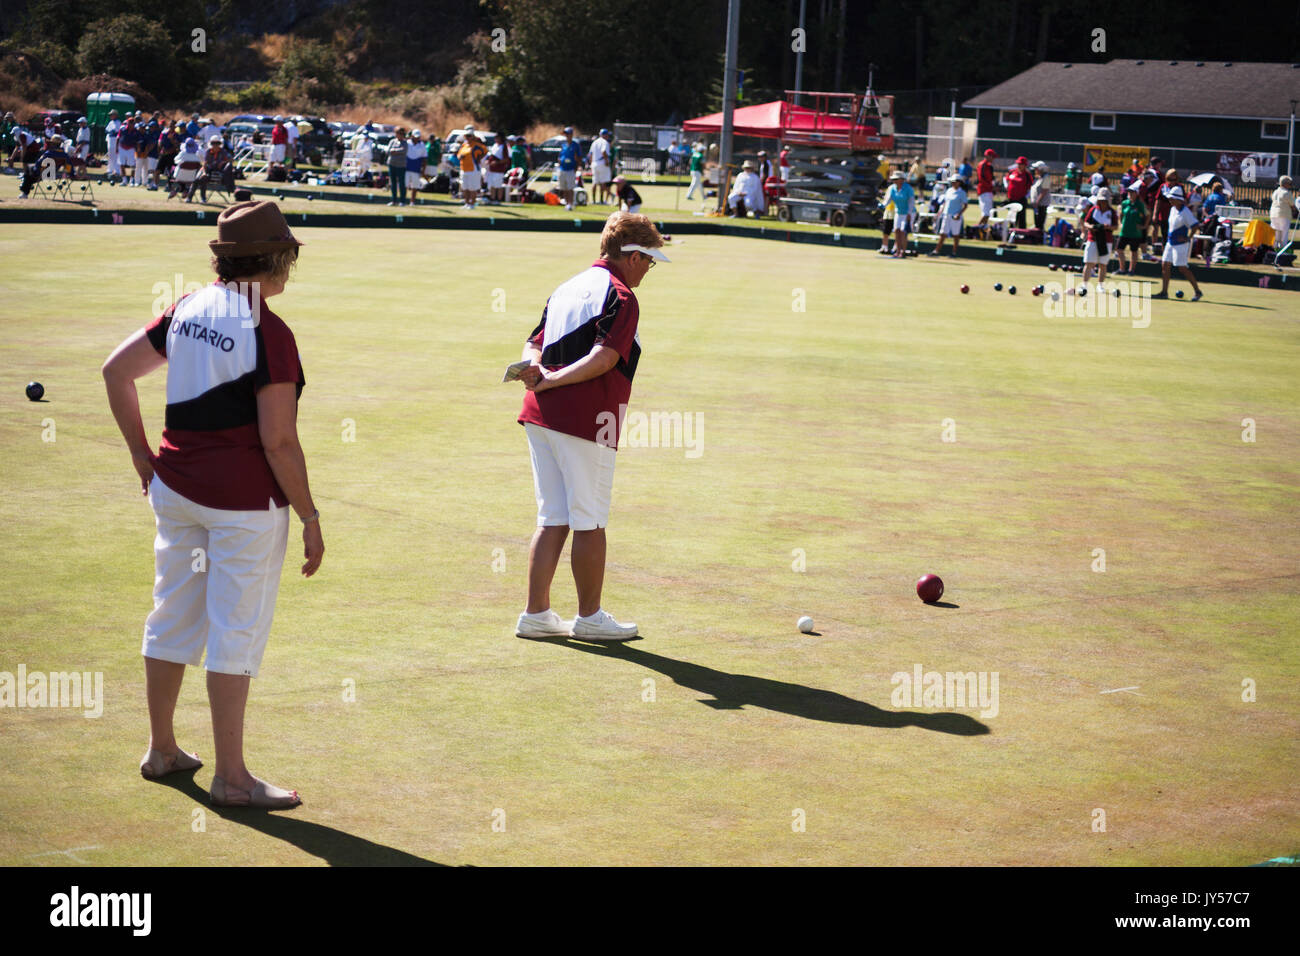 Canadian Lawn Bowling Championships tournament 2017, Victoria BC Canada Stock Photo